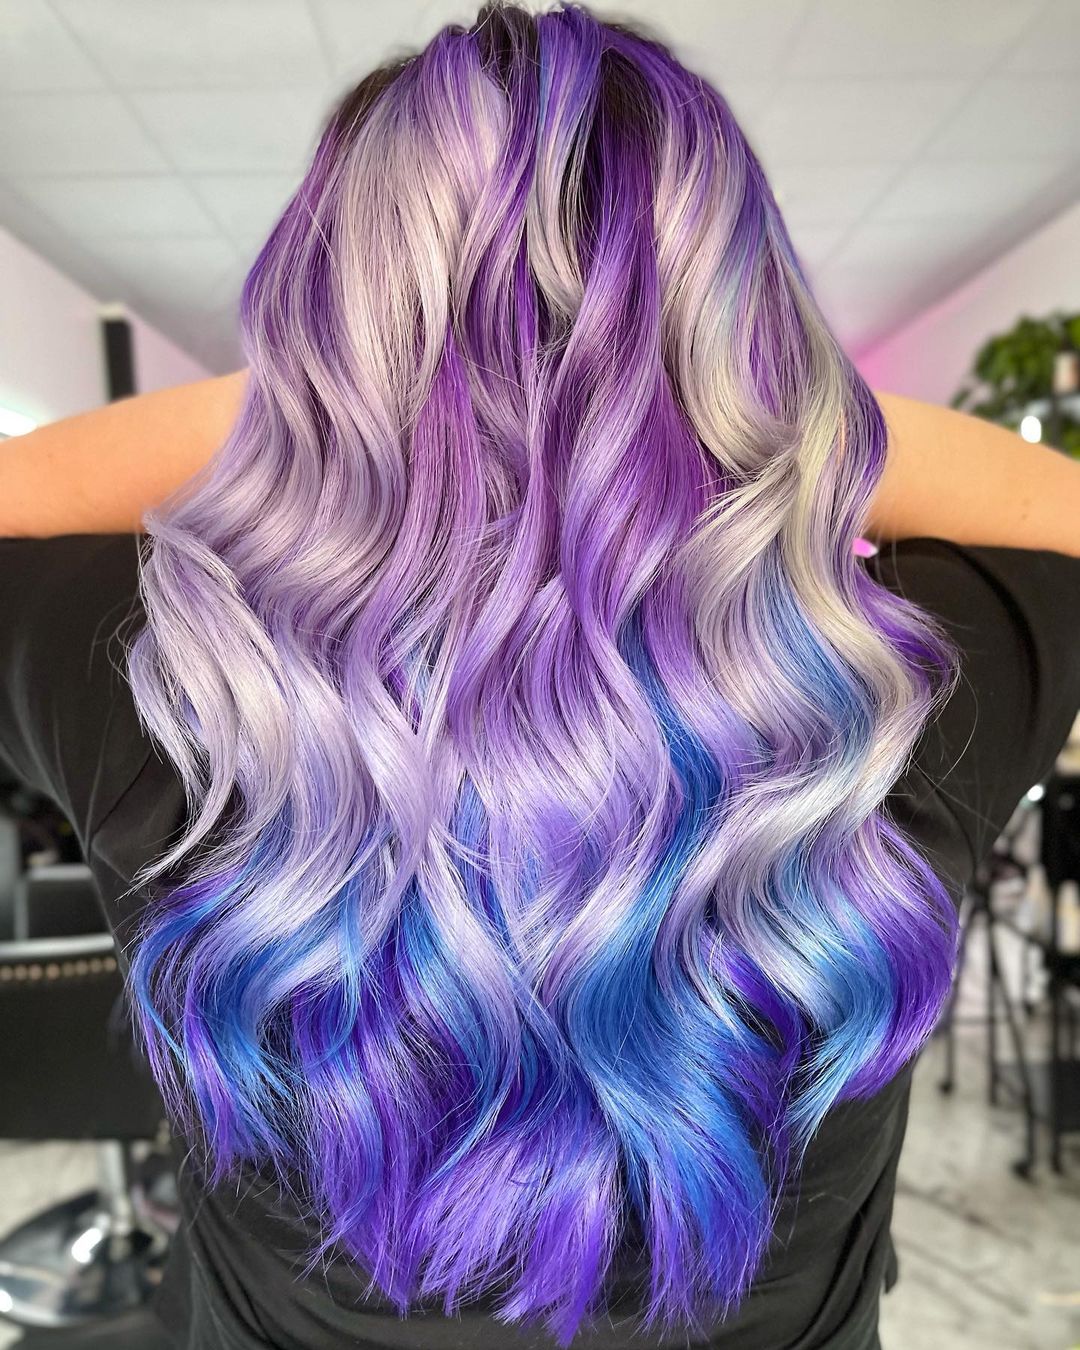 Blue, Purple and Blonde Highlights on Long Curly Hair